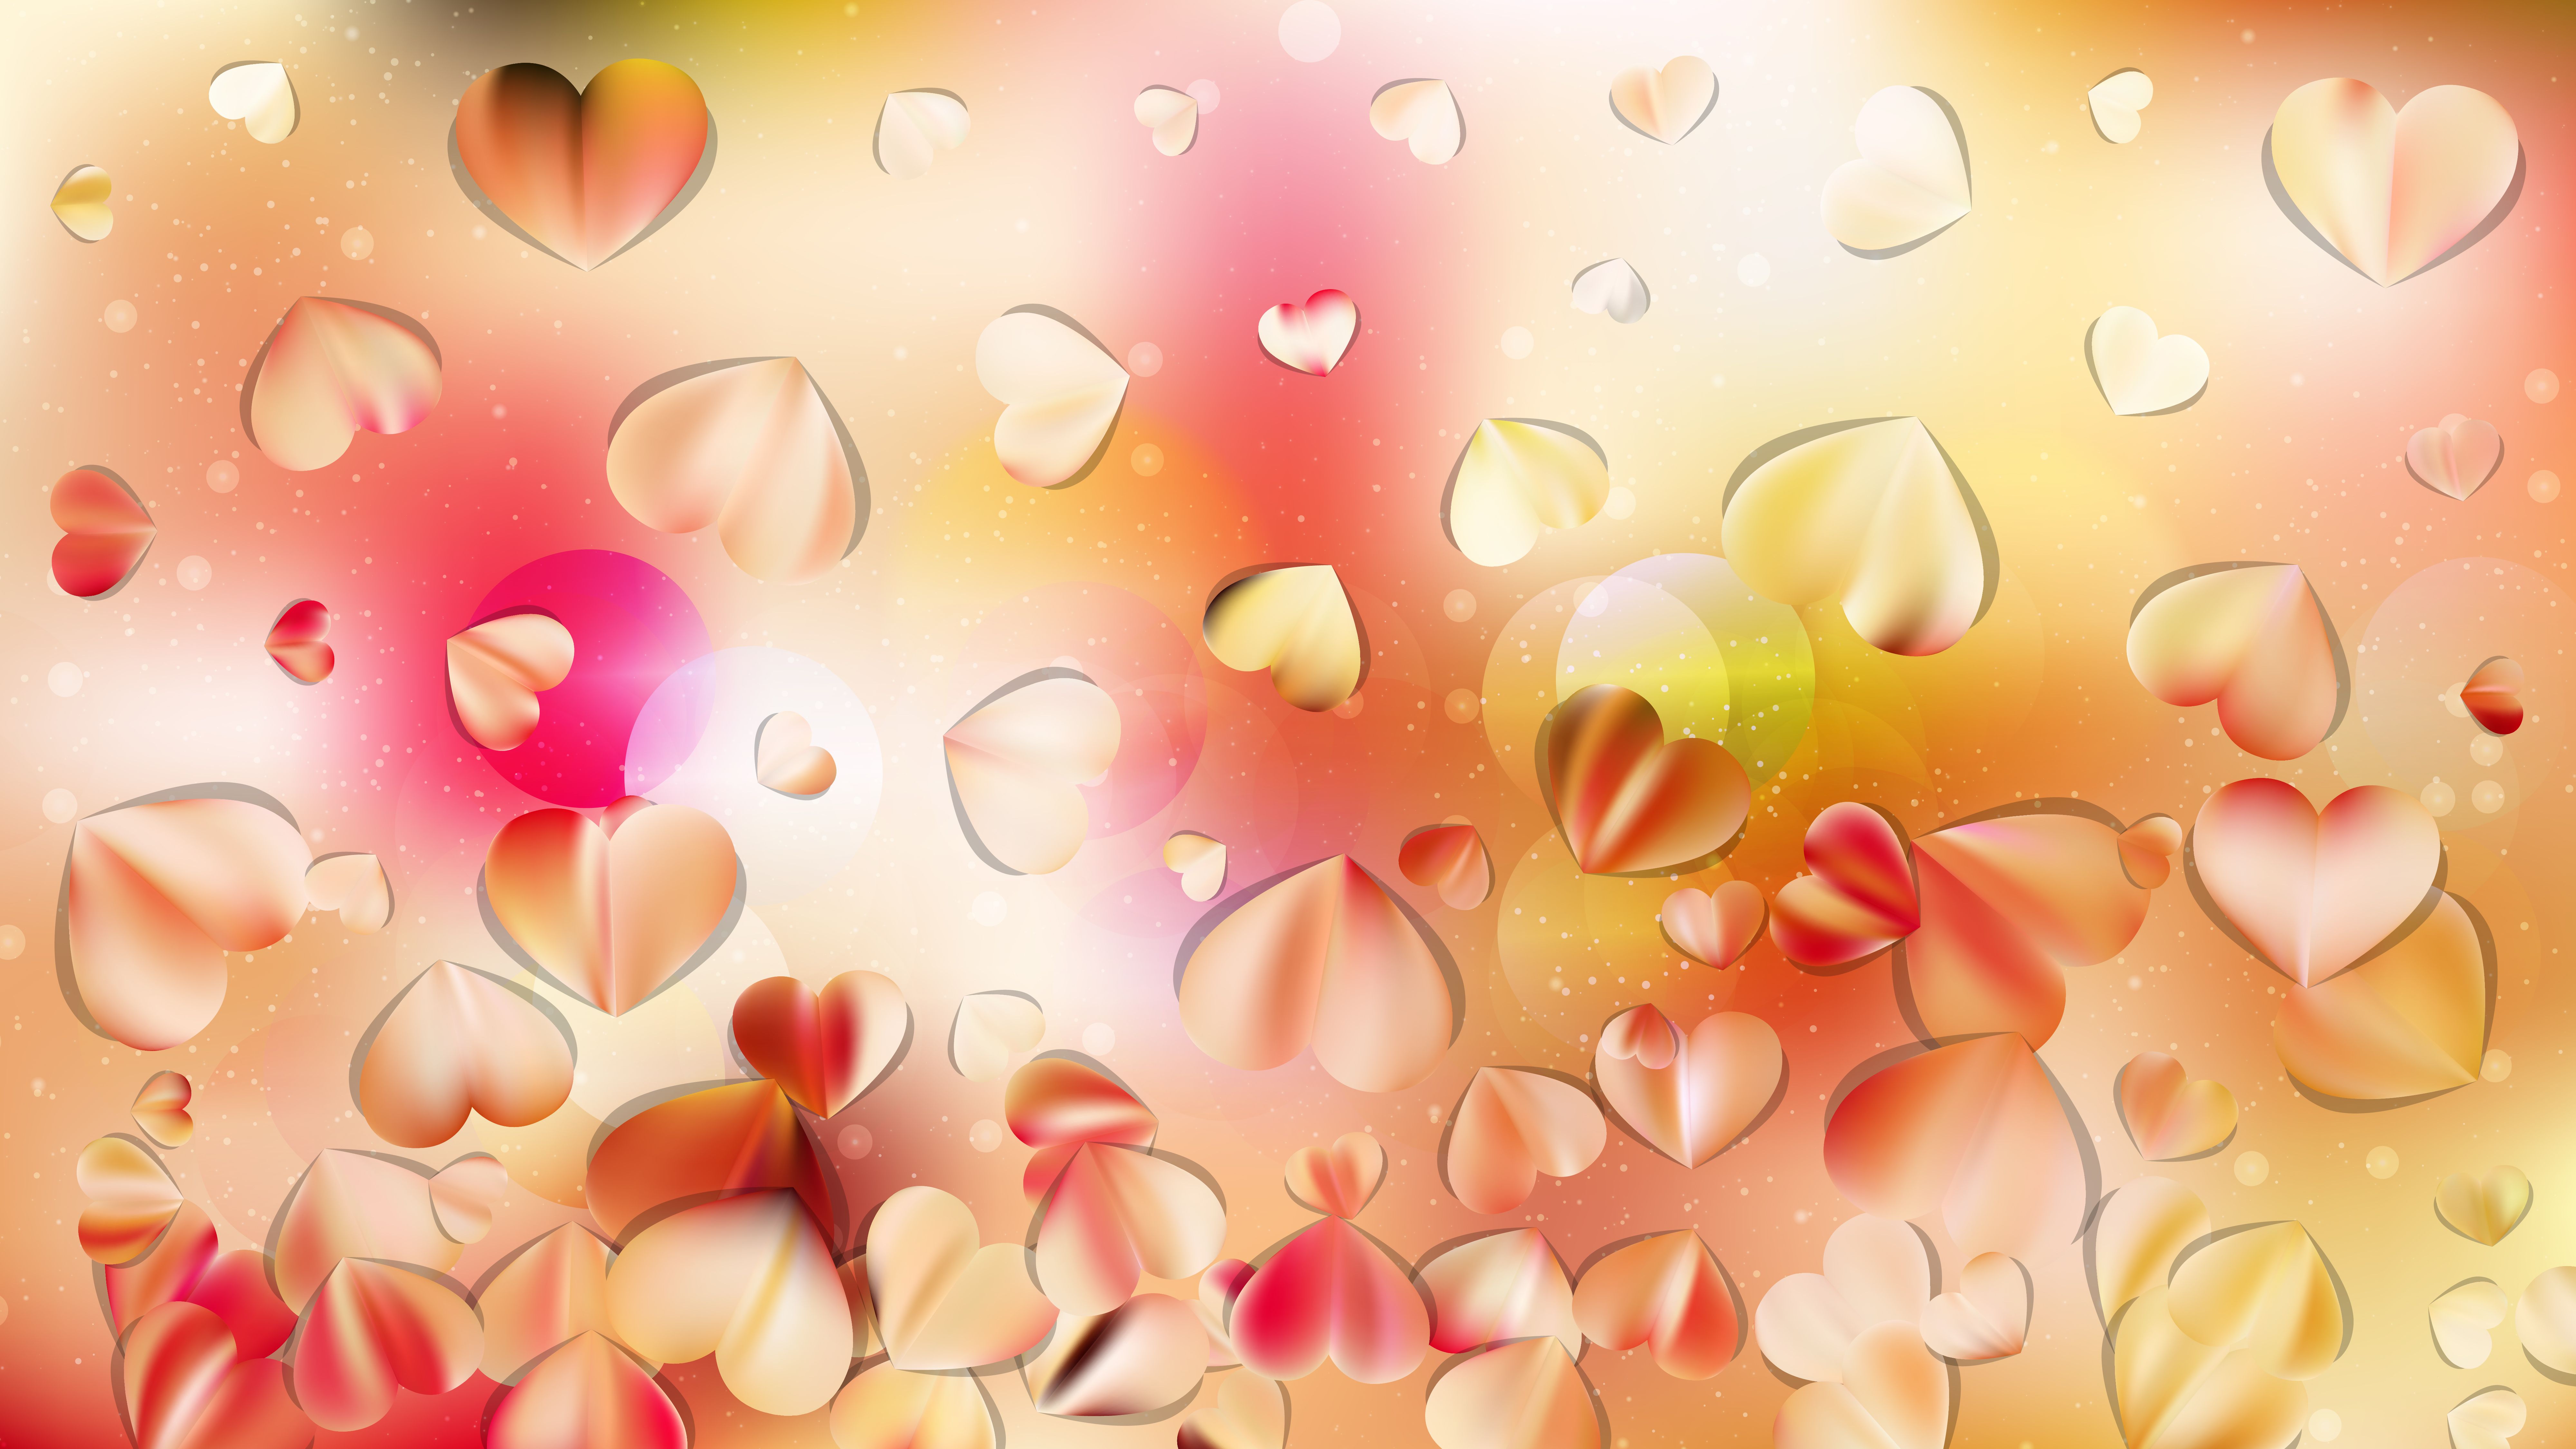 Free Pink and Yellow Heart Wallpaper Background Vector Art